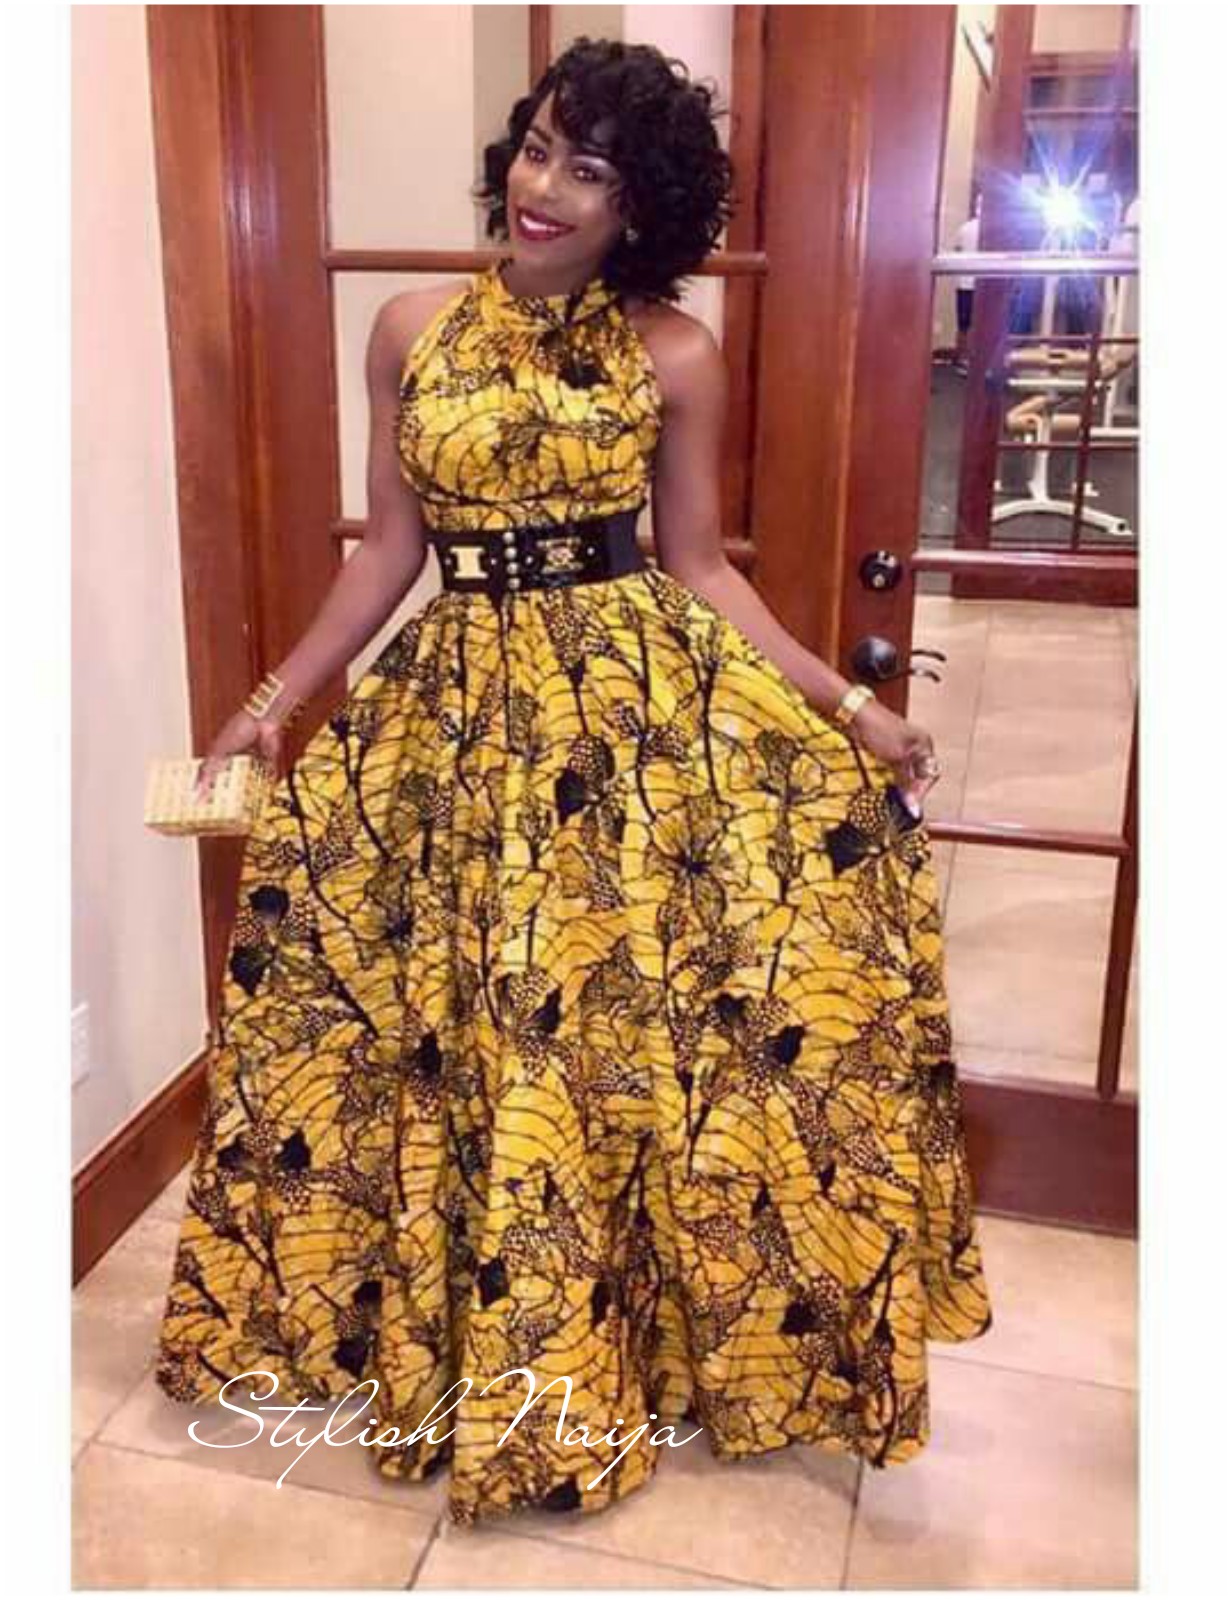 Chic Ankara Short Gown Styles Designs for Fashionable Women